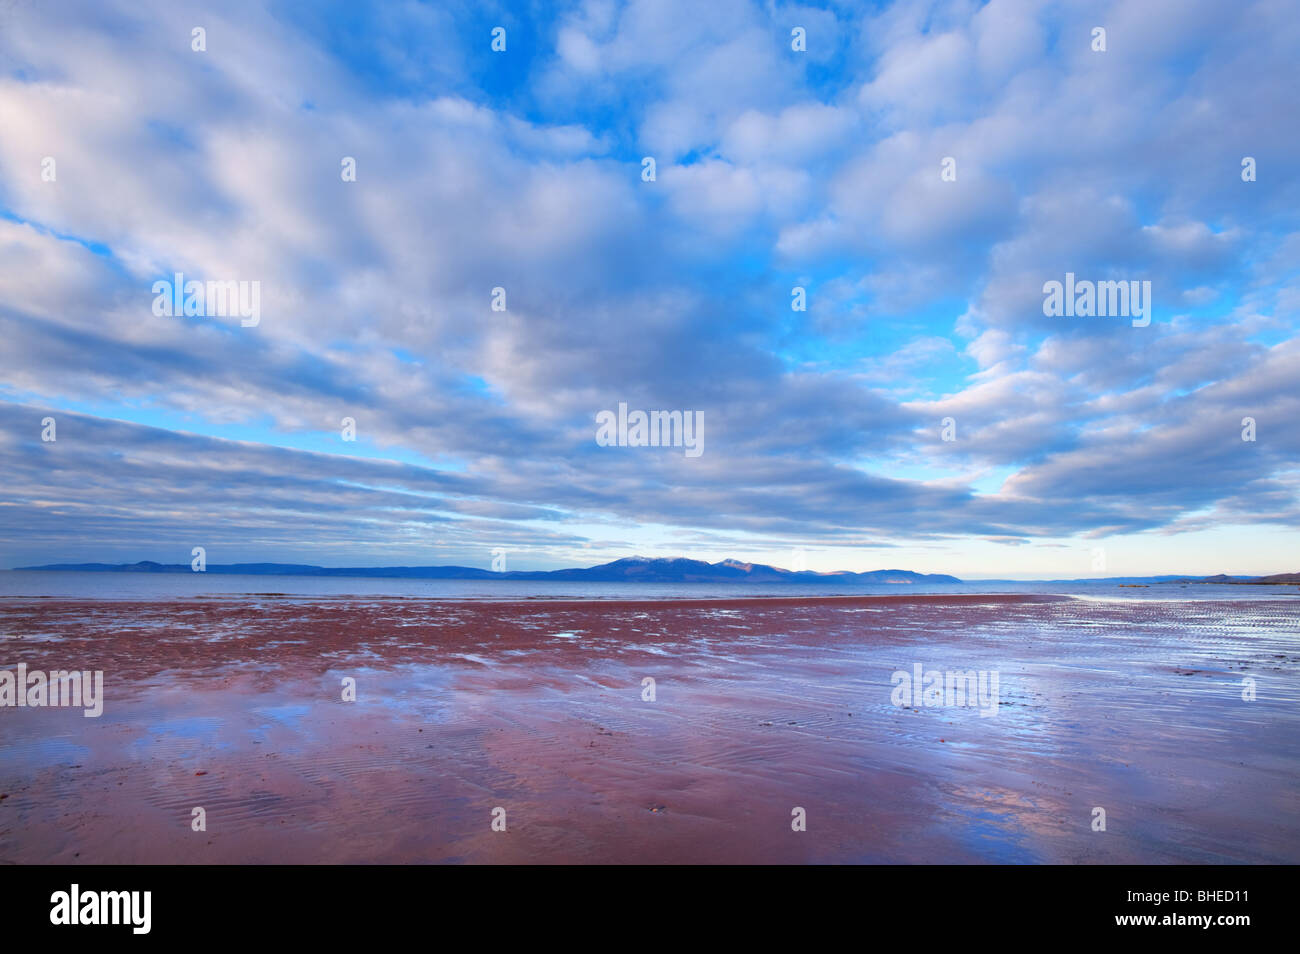 The Isle of Arran from the beach at Seamill, Firth of Clyde, Scotland, UK. Stock Photo